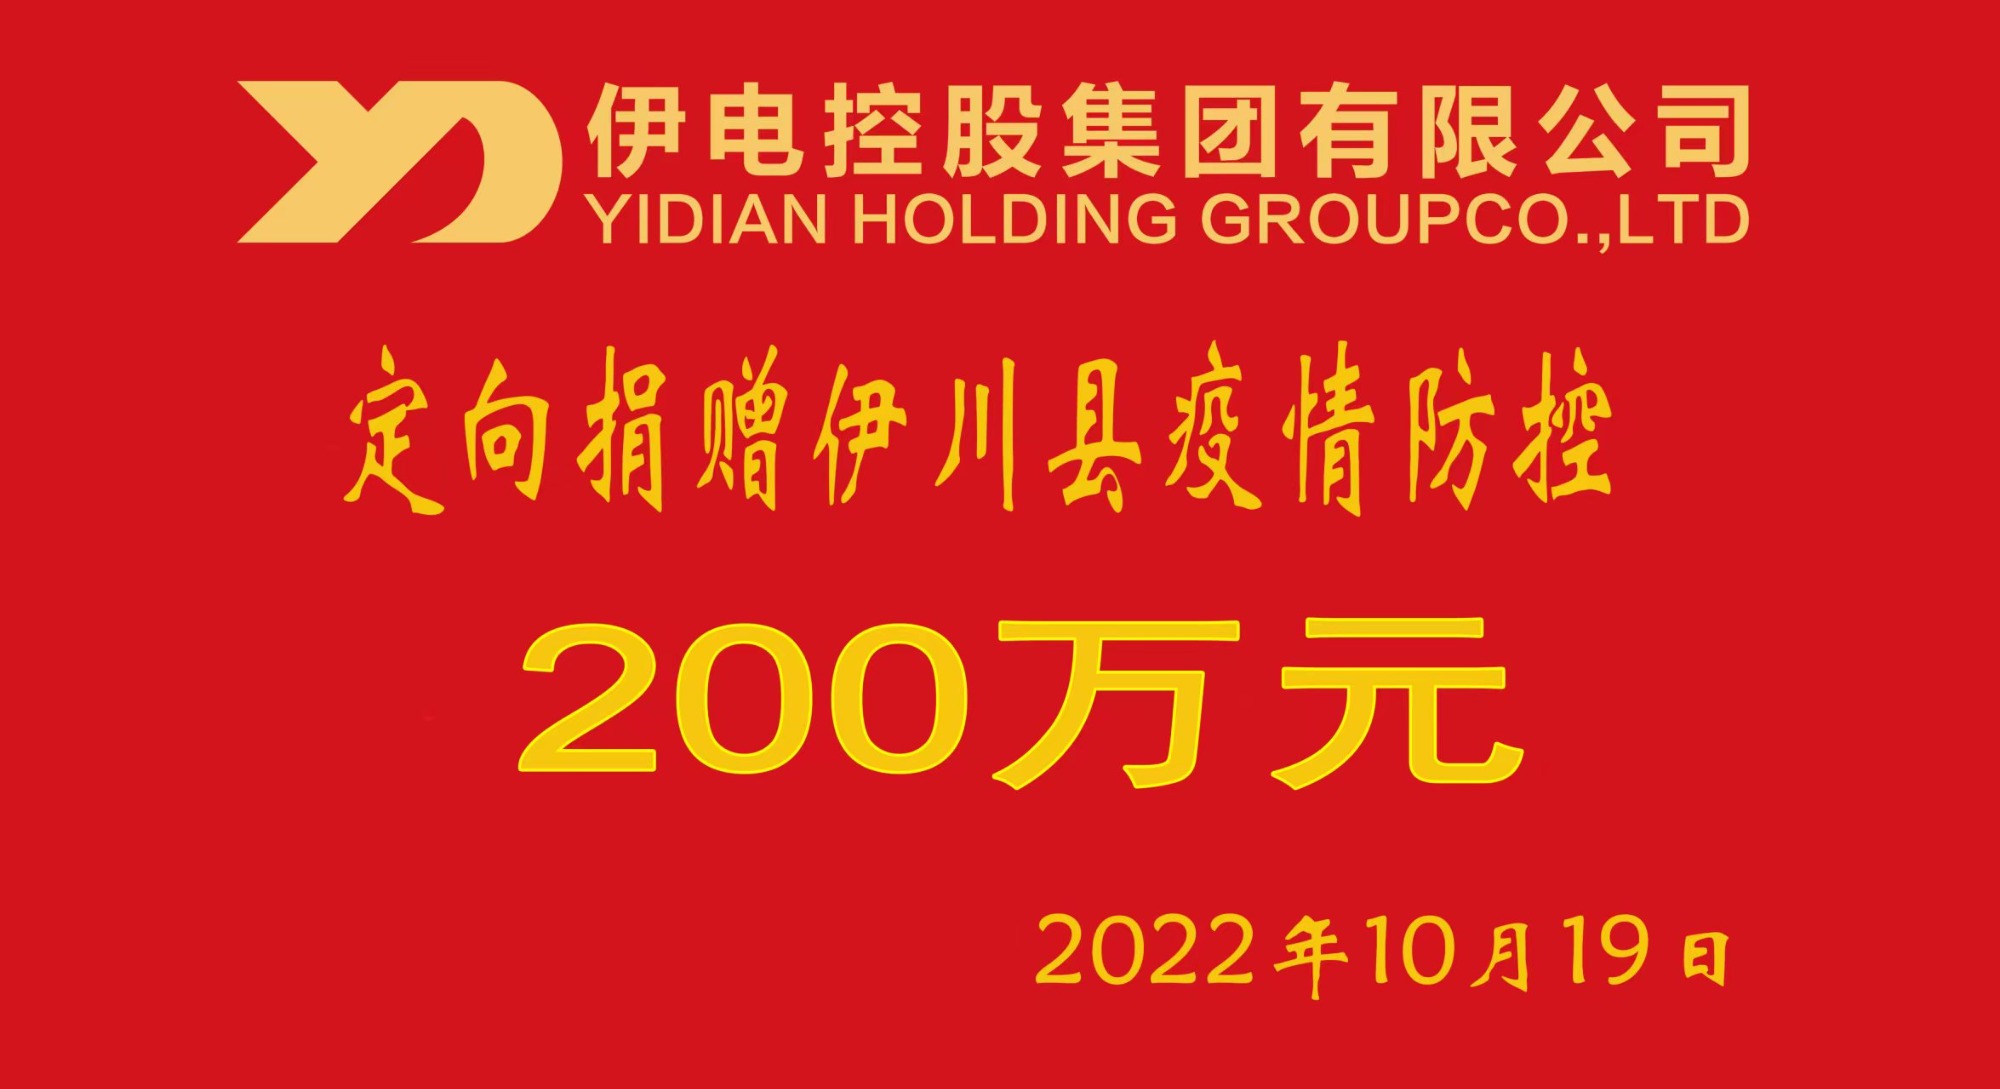 Yidian Group donated 2 million yuan to help Yichuan County fight against the COVID-19